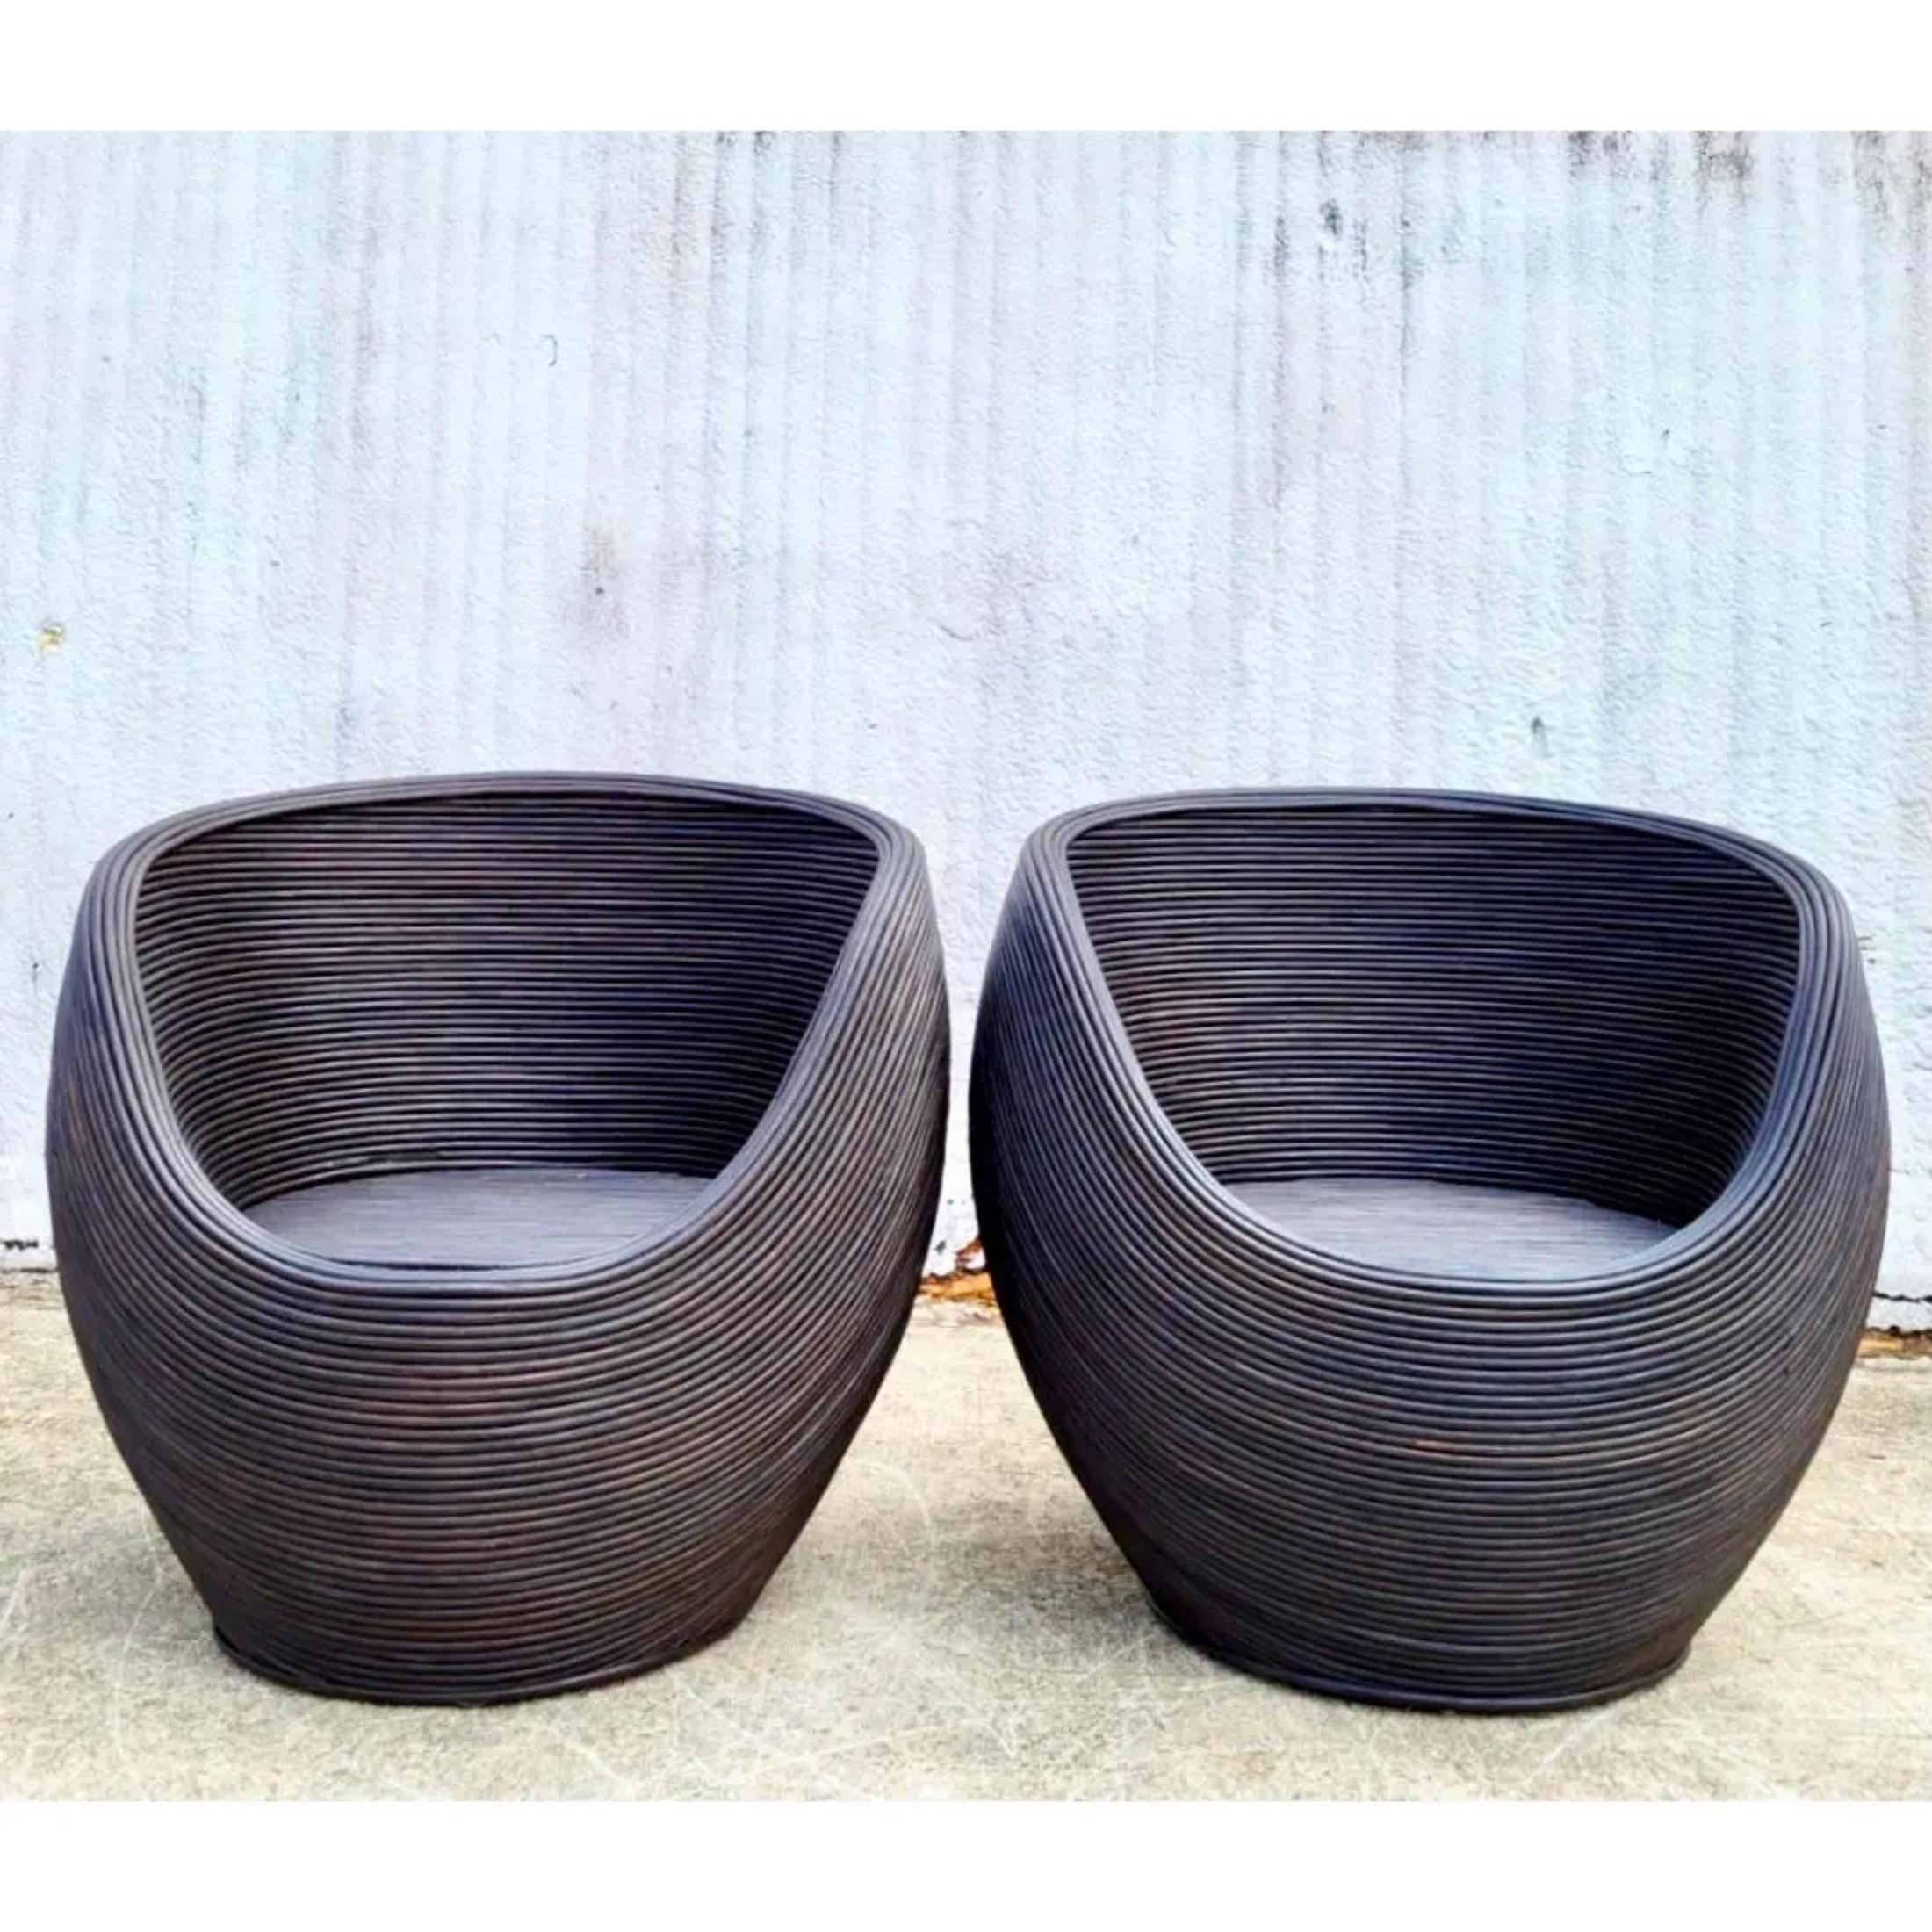 Fantastic pair of Coastal ebony pencil reed pod chairs. Beautiful organic shape in a deep rich brown- almost black. Flashes of the natural still peeking thru. Super chic addition to any decor. Acquired from a Palm Beach estate.